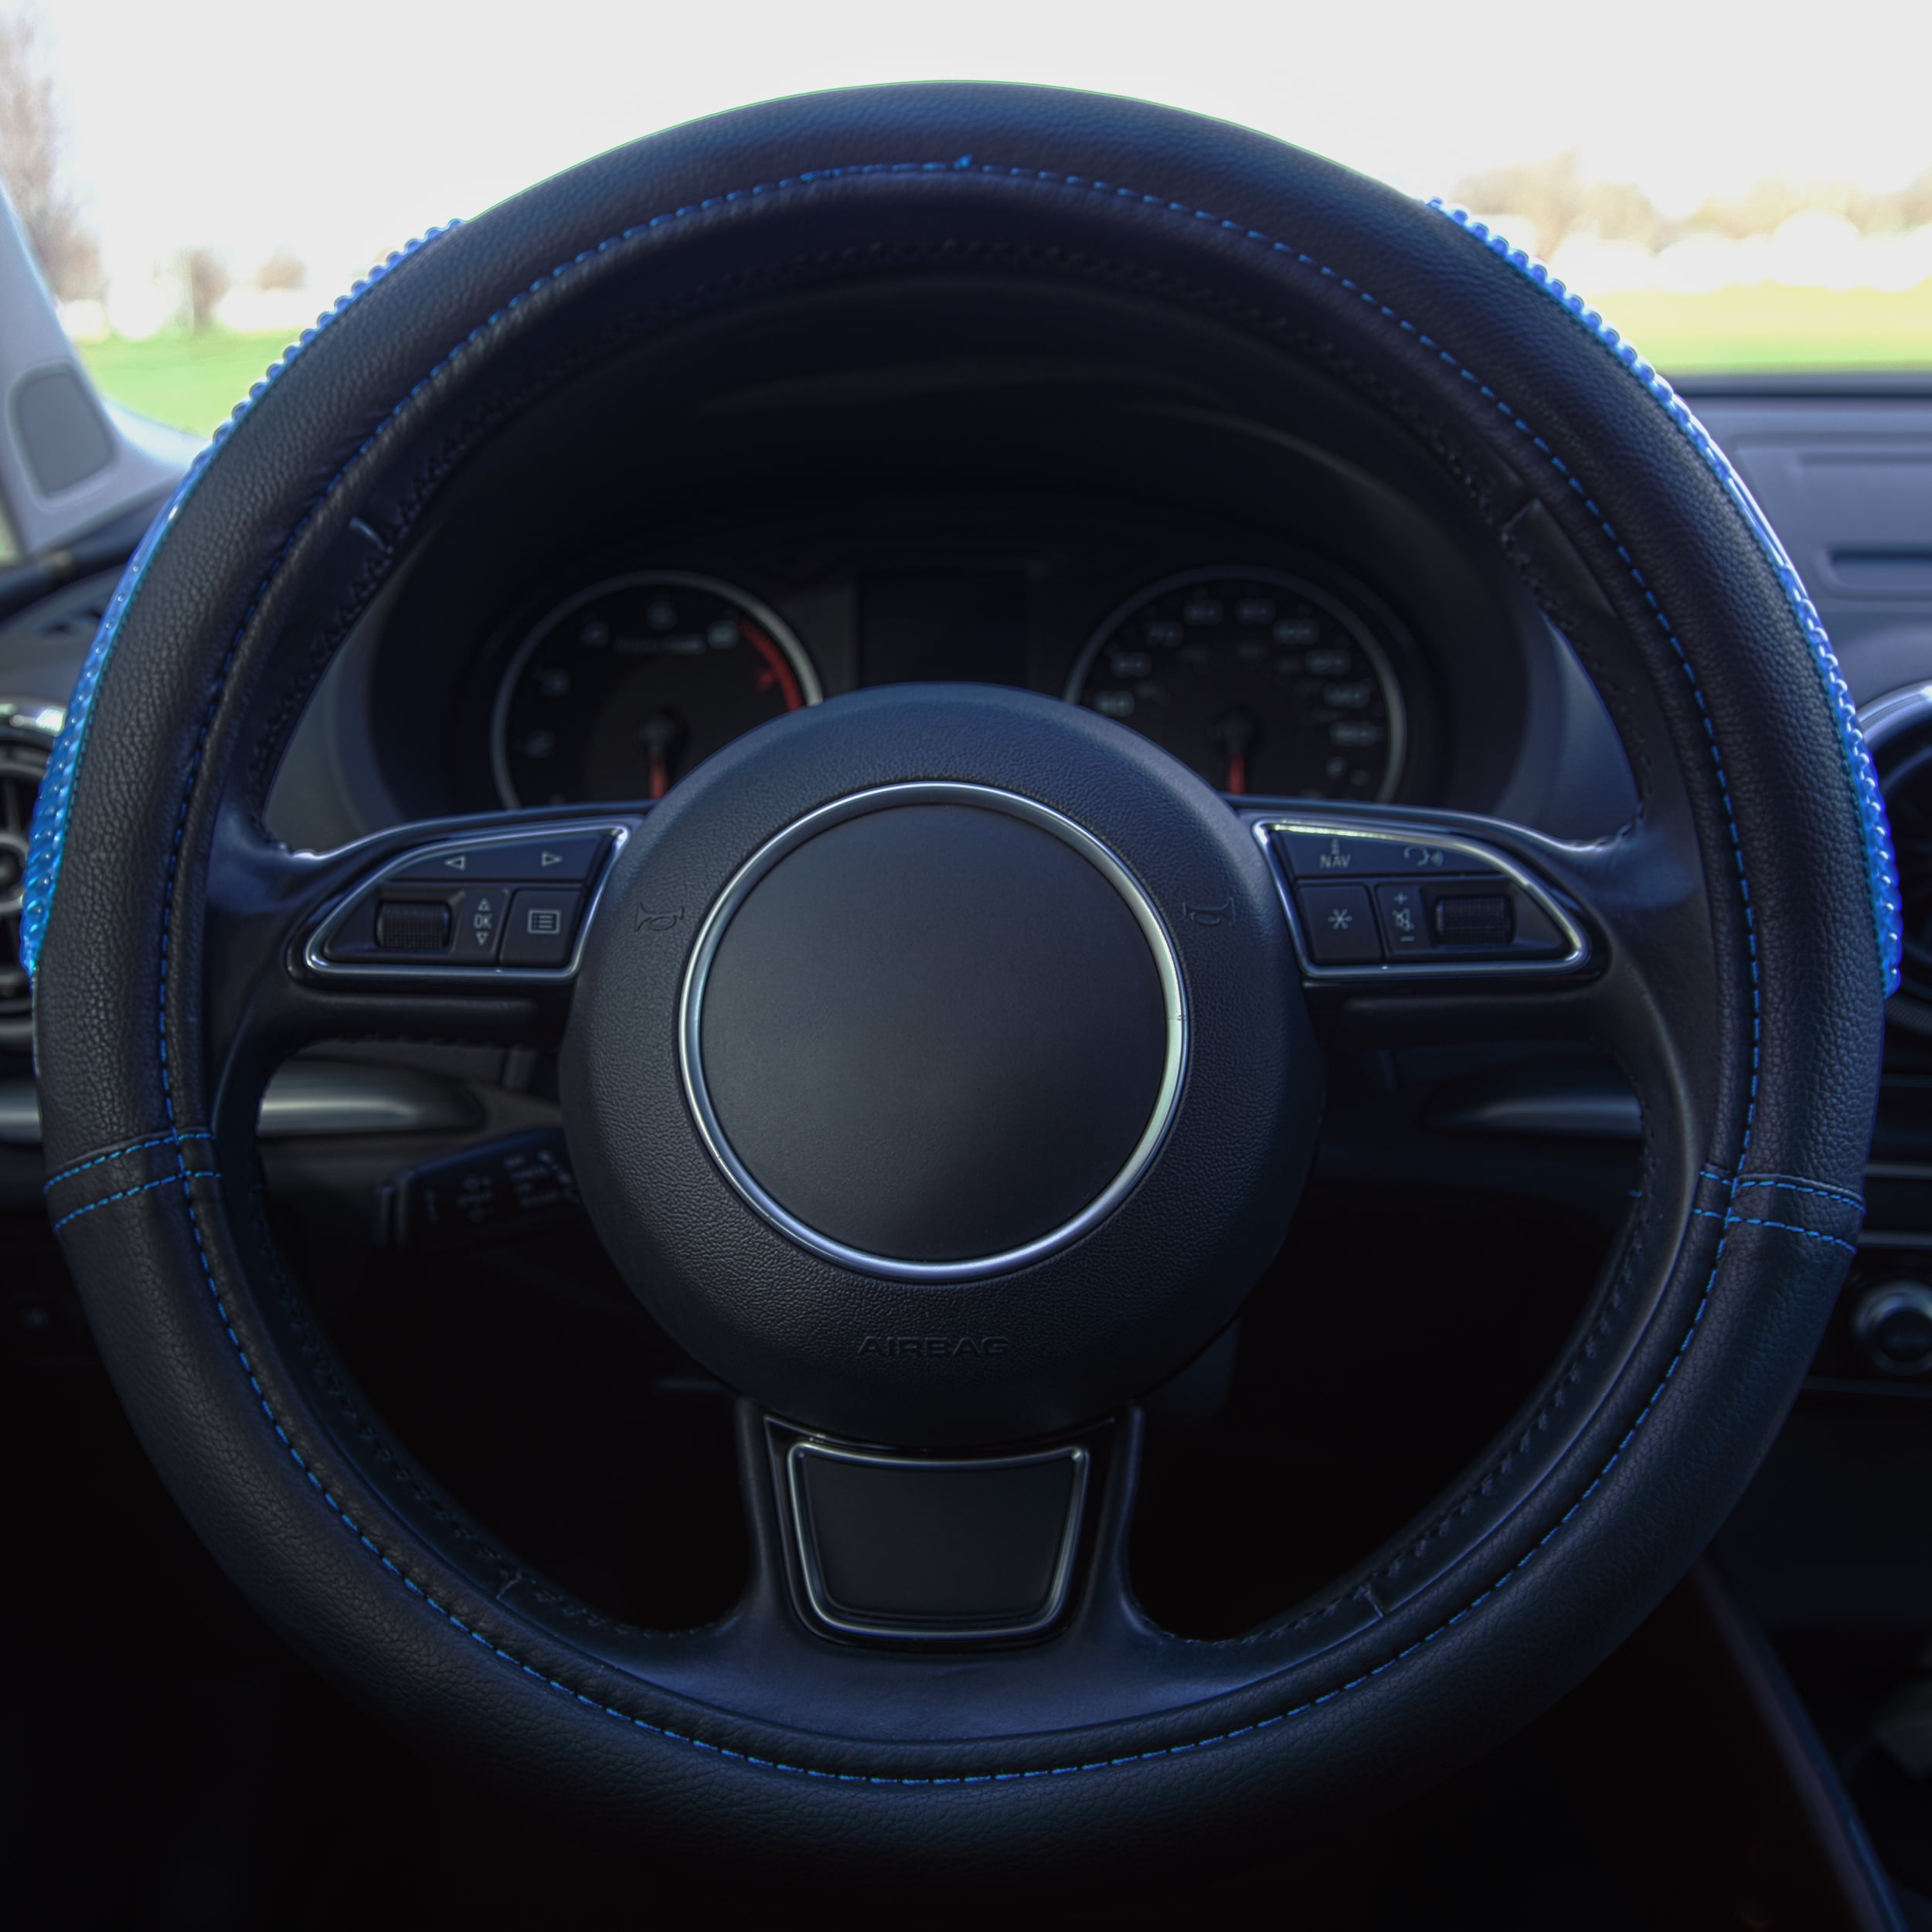 Ergo Drive Comfort Gel Steering Wheel Cover, Black and Blue Accent